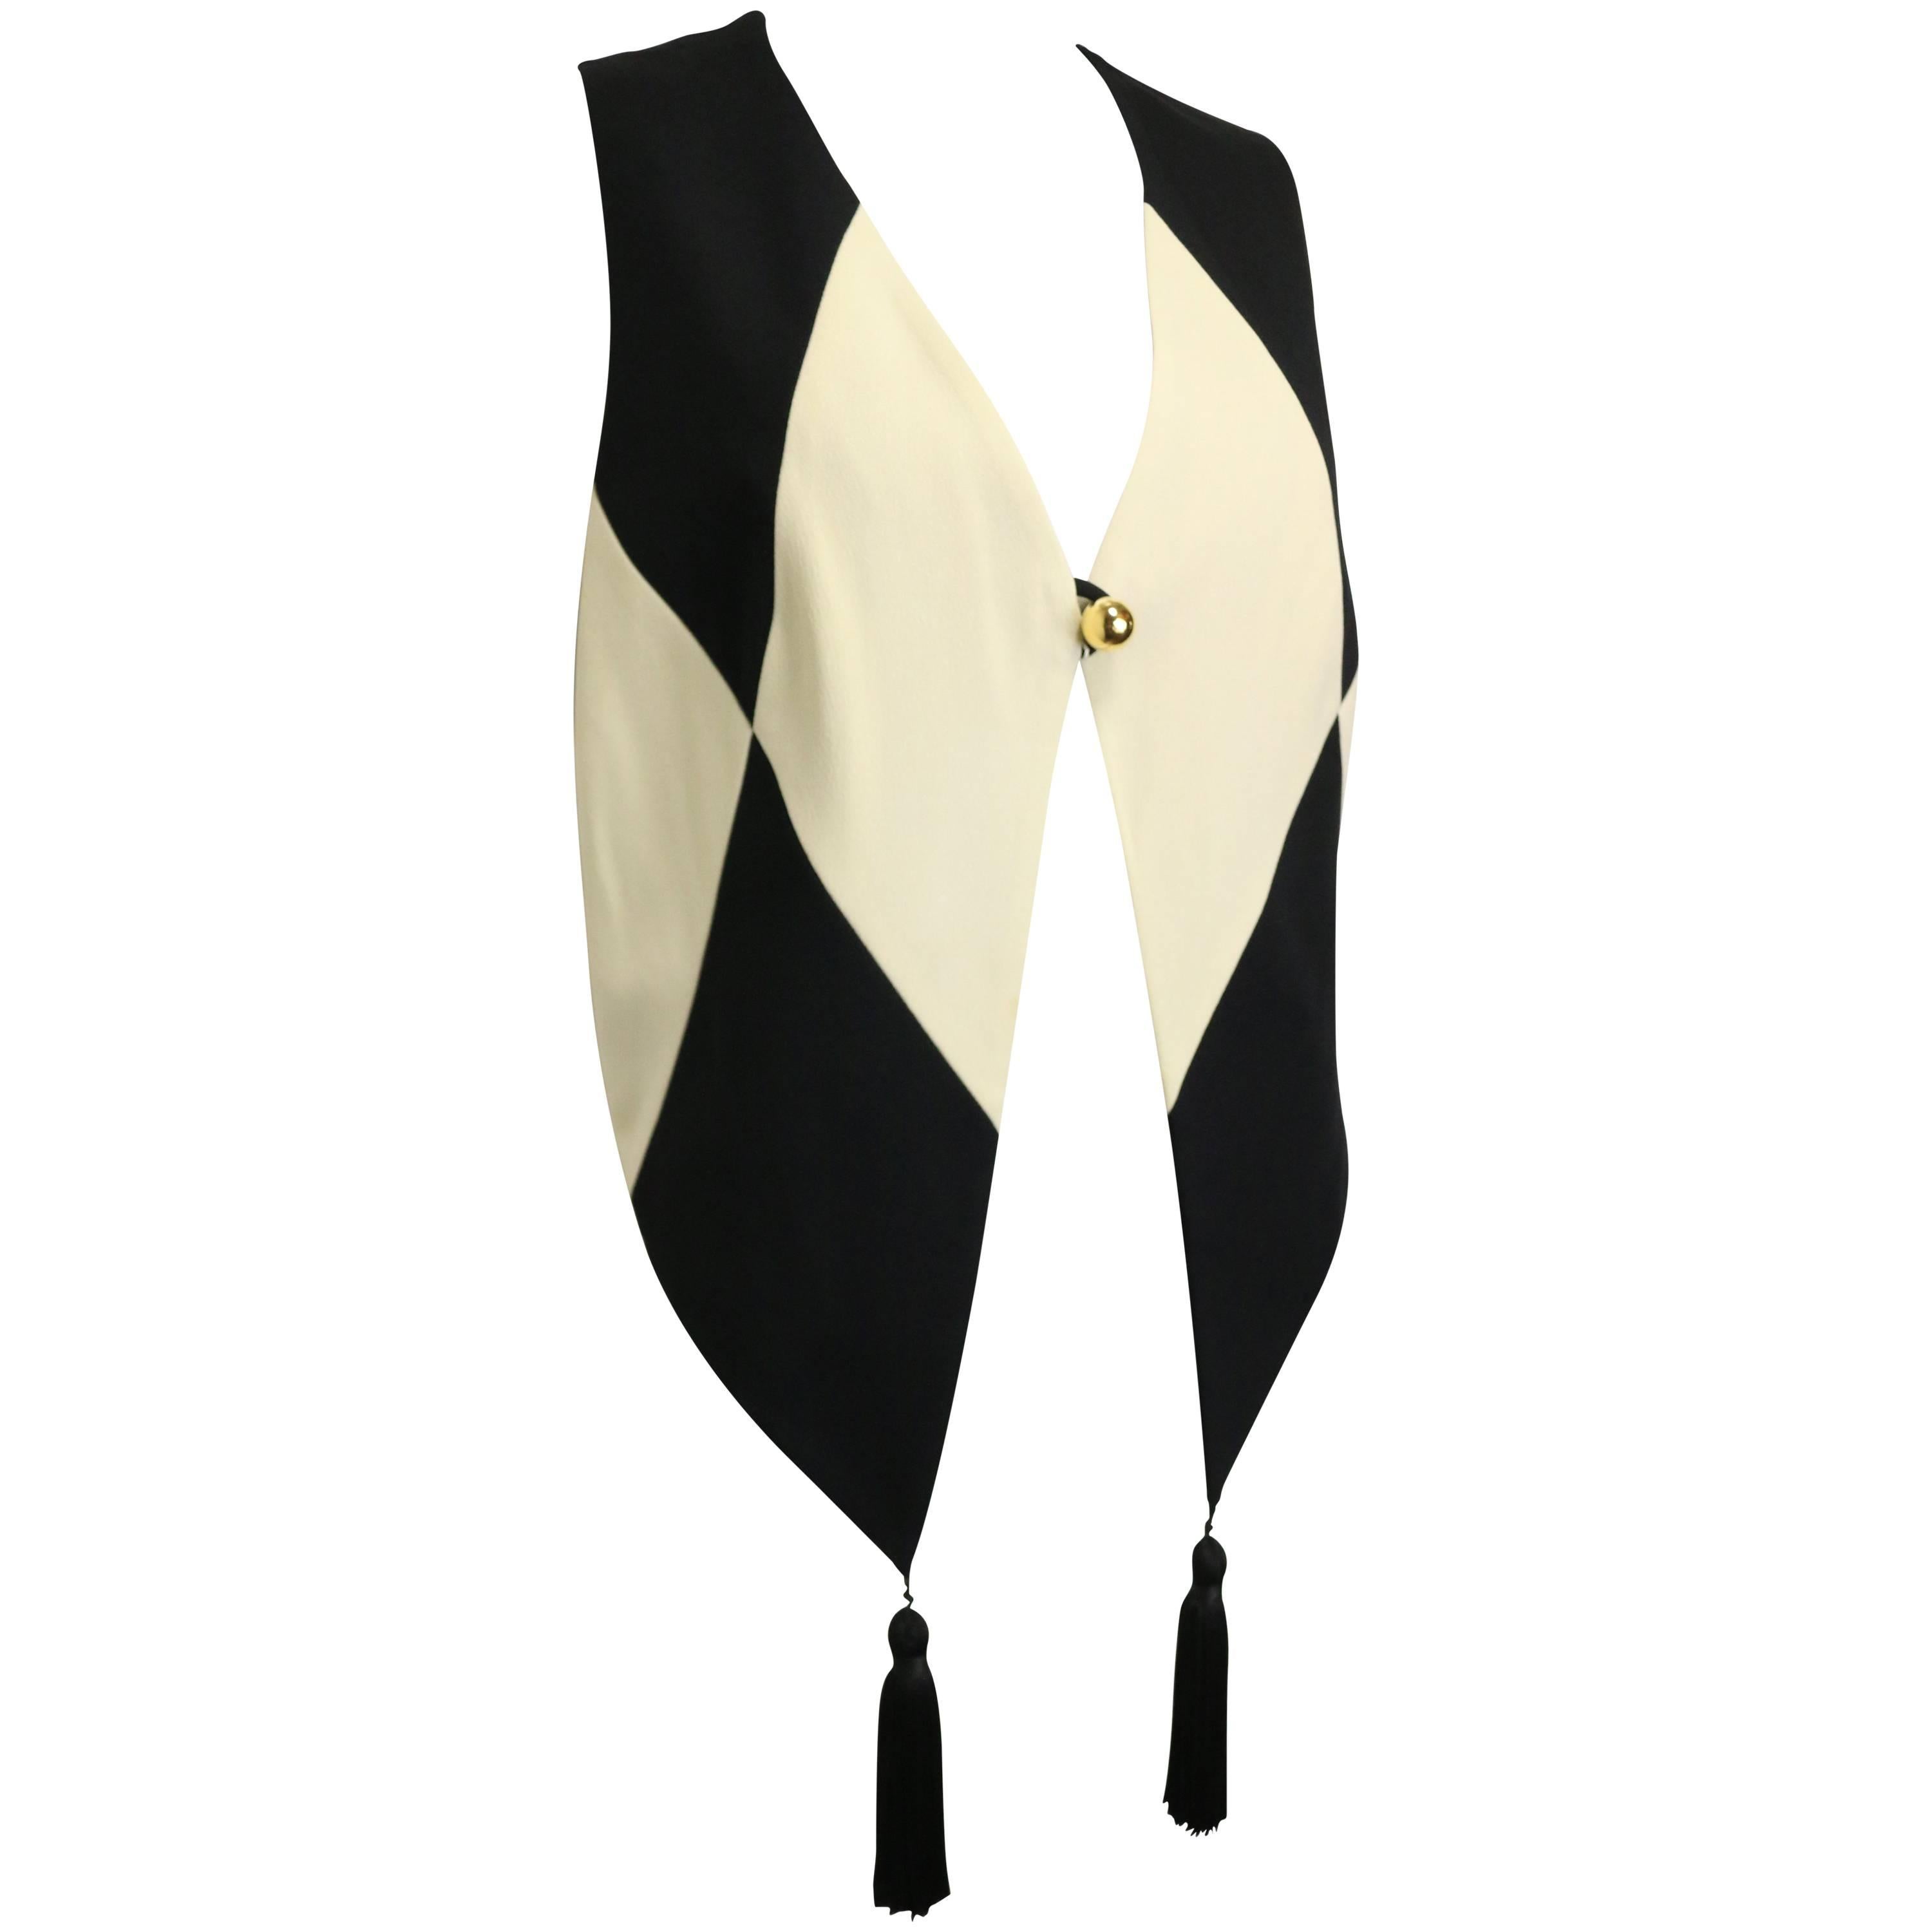 Moschino Cheap and Chic Black and White Harlequin Waistcoat with Tassels